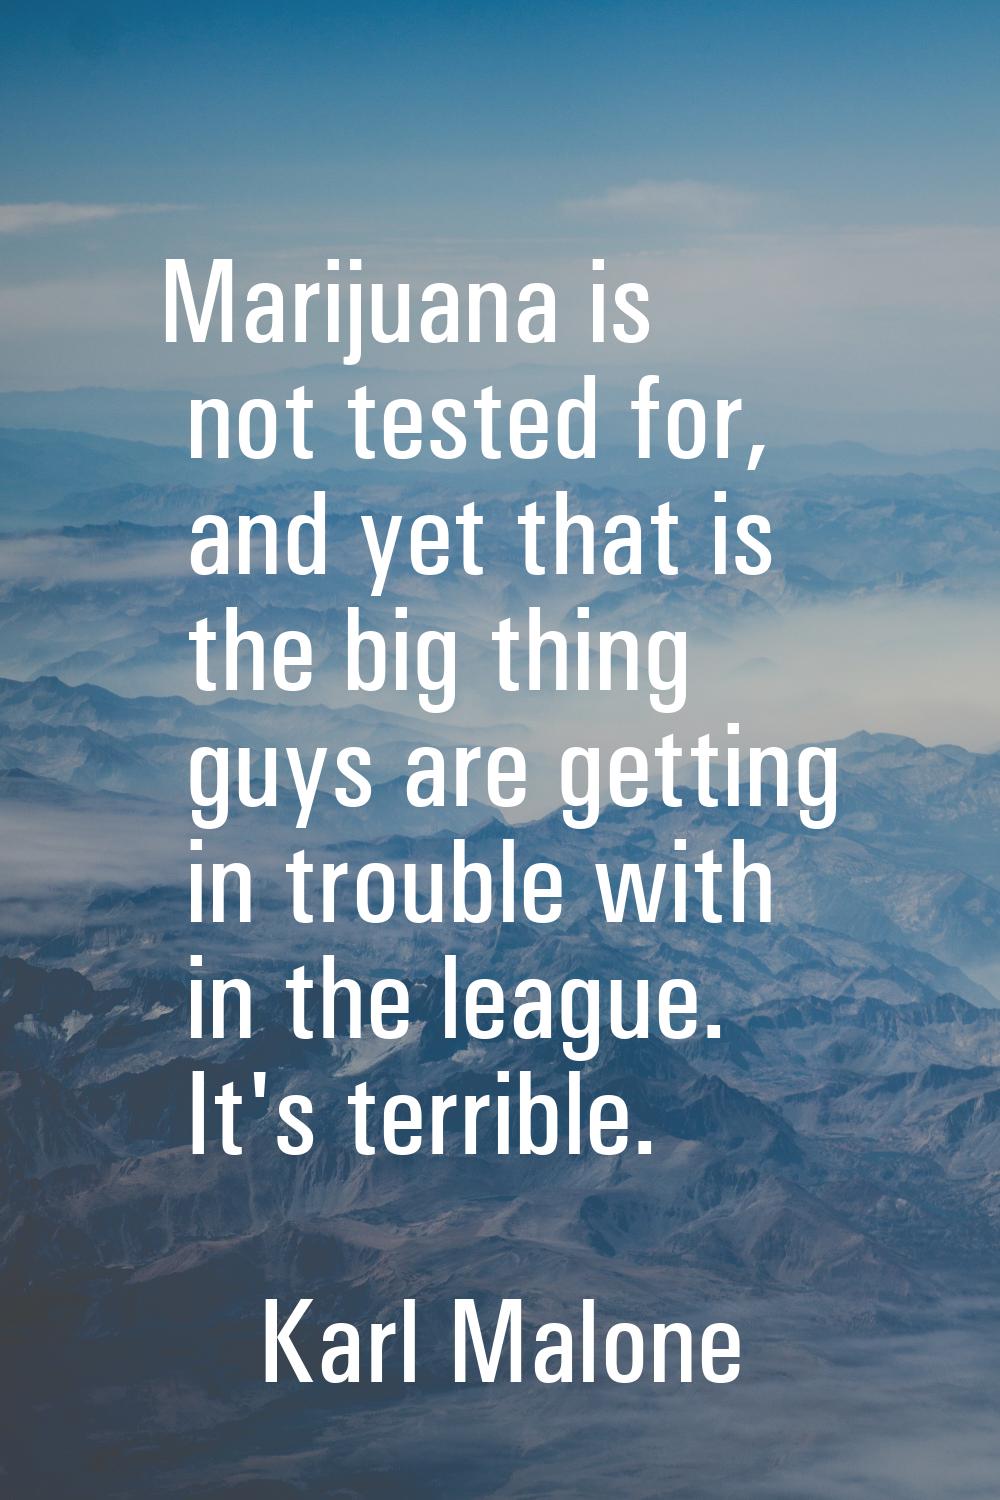 Marijuana is not tested for, and yet that is the big thing guys are getting in trouble with in the 